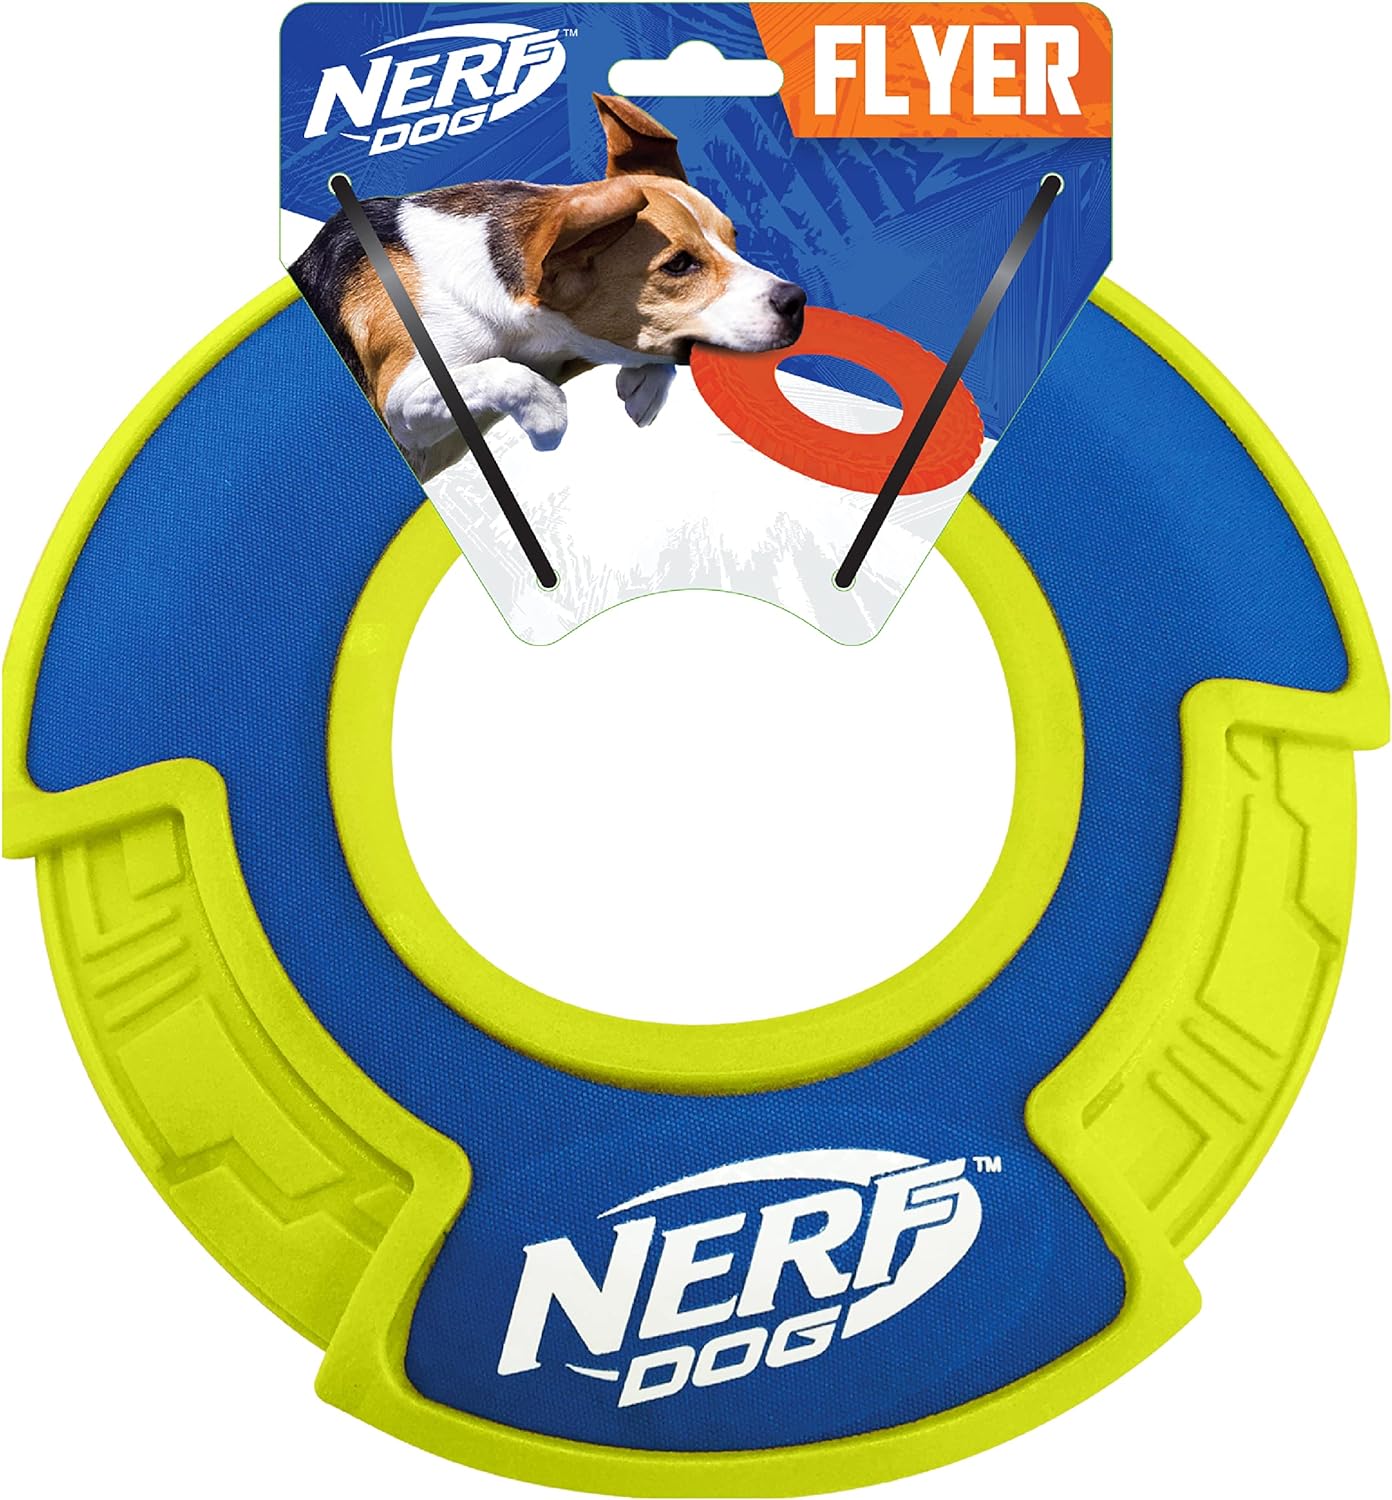 Nerf Dog Toss and Retrieve Flying Disc Dog Toys, Blue/Green